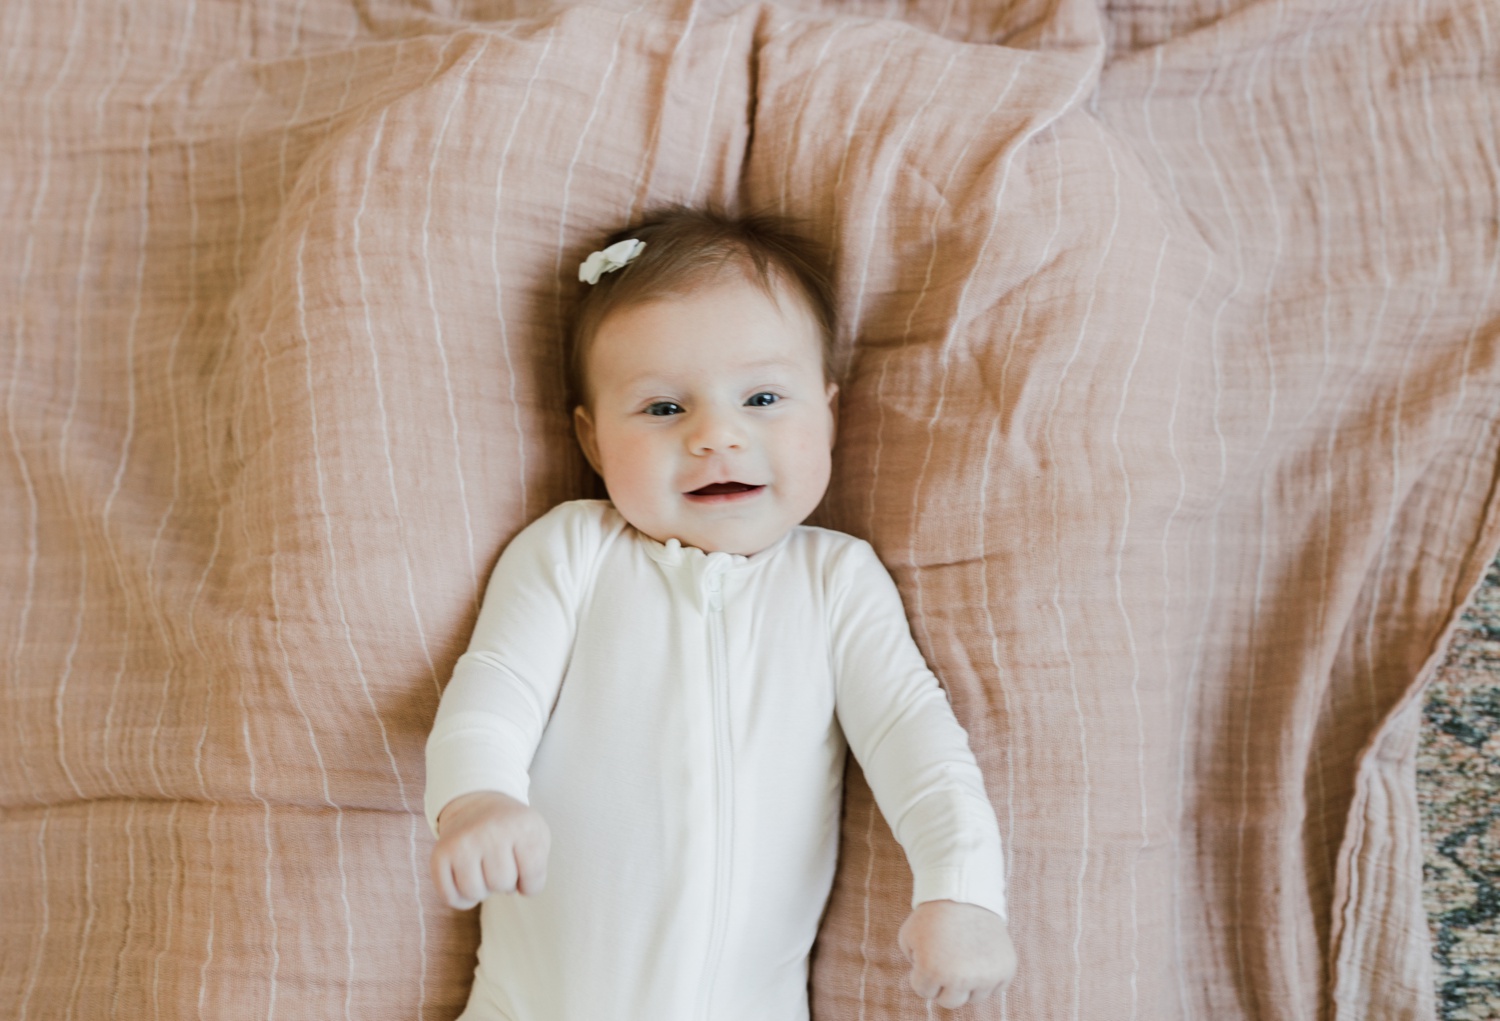 How to prepare for an at-home newborn session